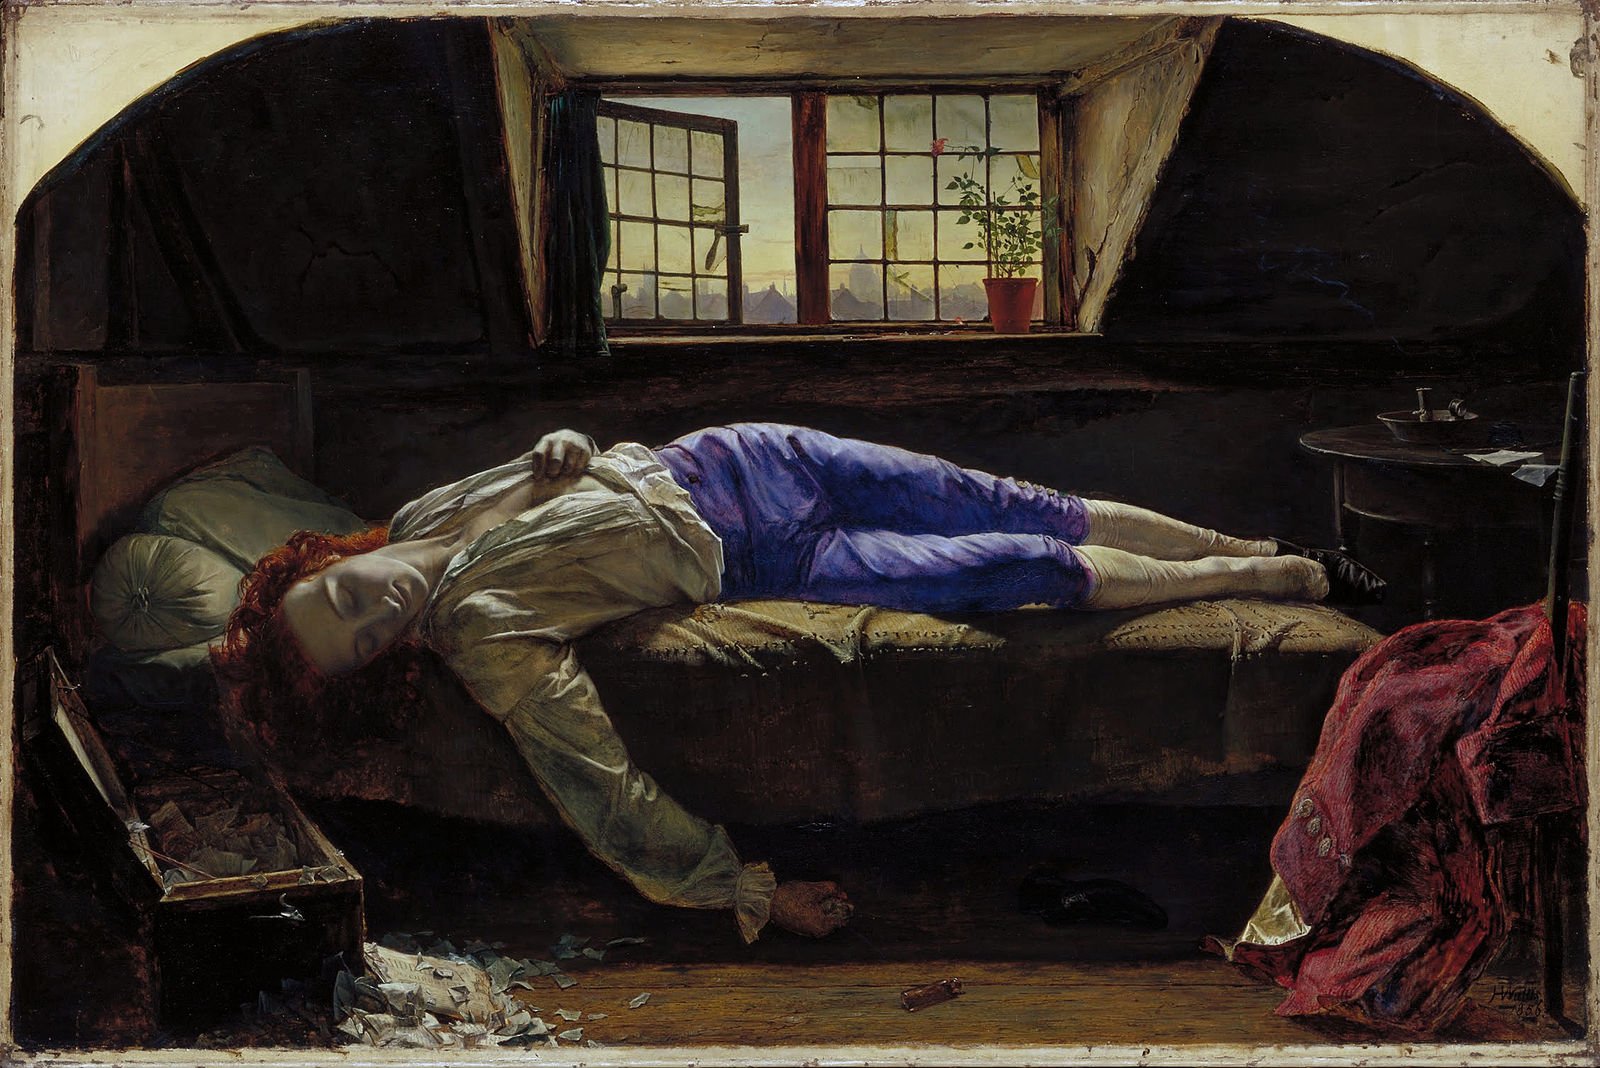 Chatterton by Henry Wallis. 1856.